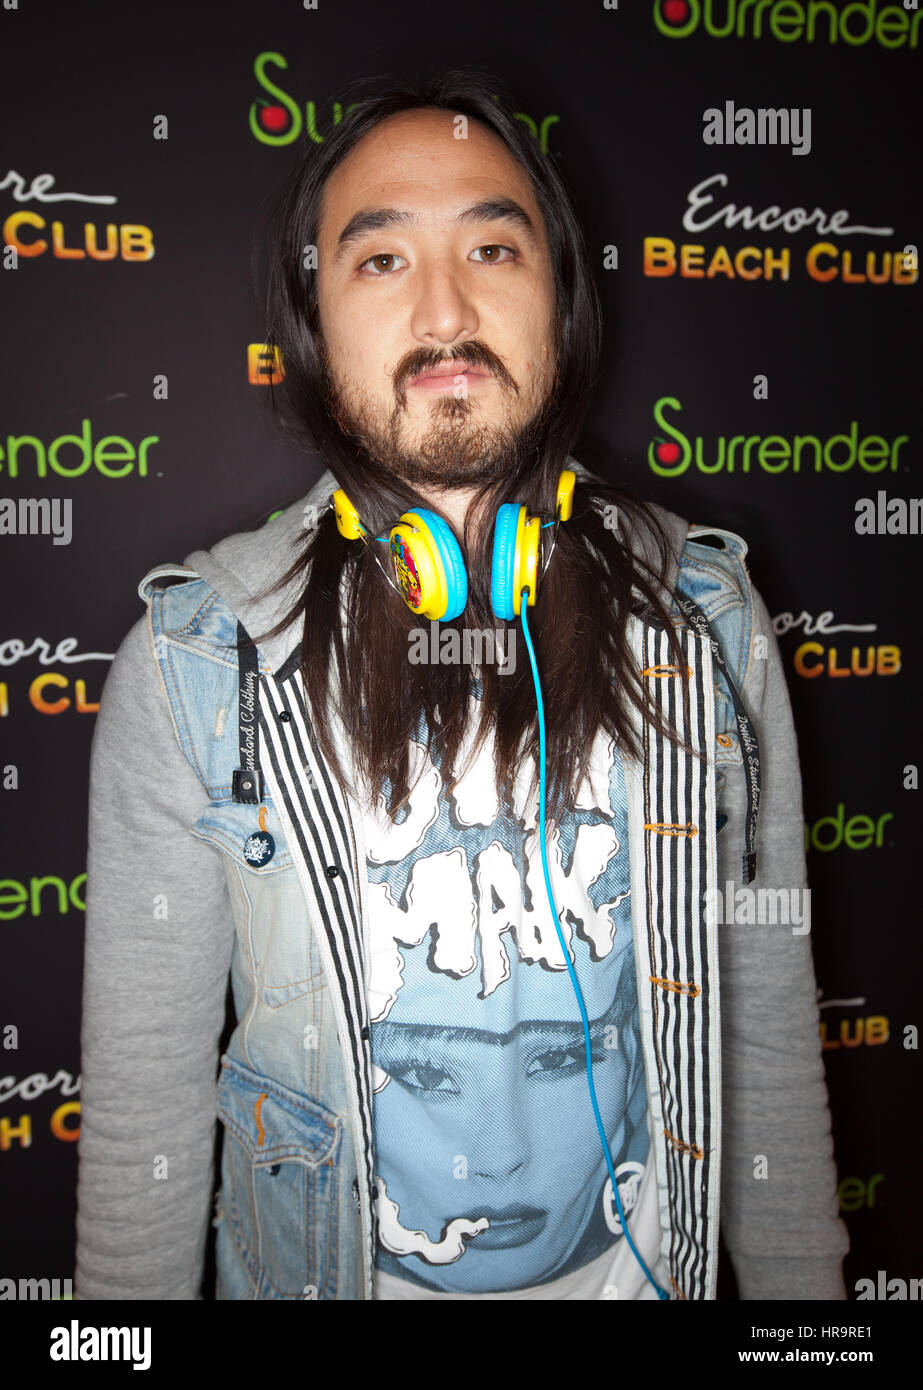 DJ Steve Aoki Performs at Surrender Nightclub Grand Opening at Encore Las Vegas in Las Vegas, NV on May 28, 2010 Encore beach Club and Surrender nightclub are the newest and most highly-anticipated Las Vegas clubs on the Strip. Stock Photo